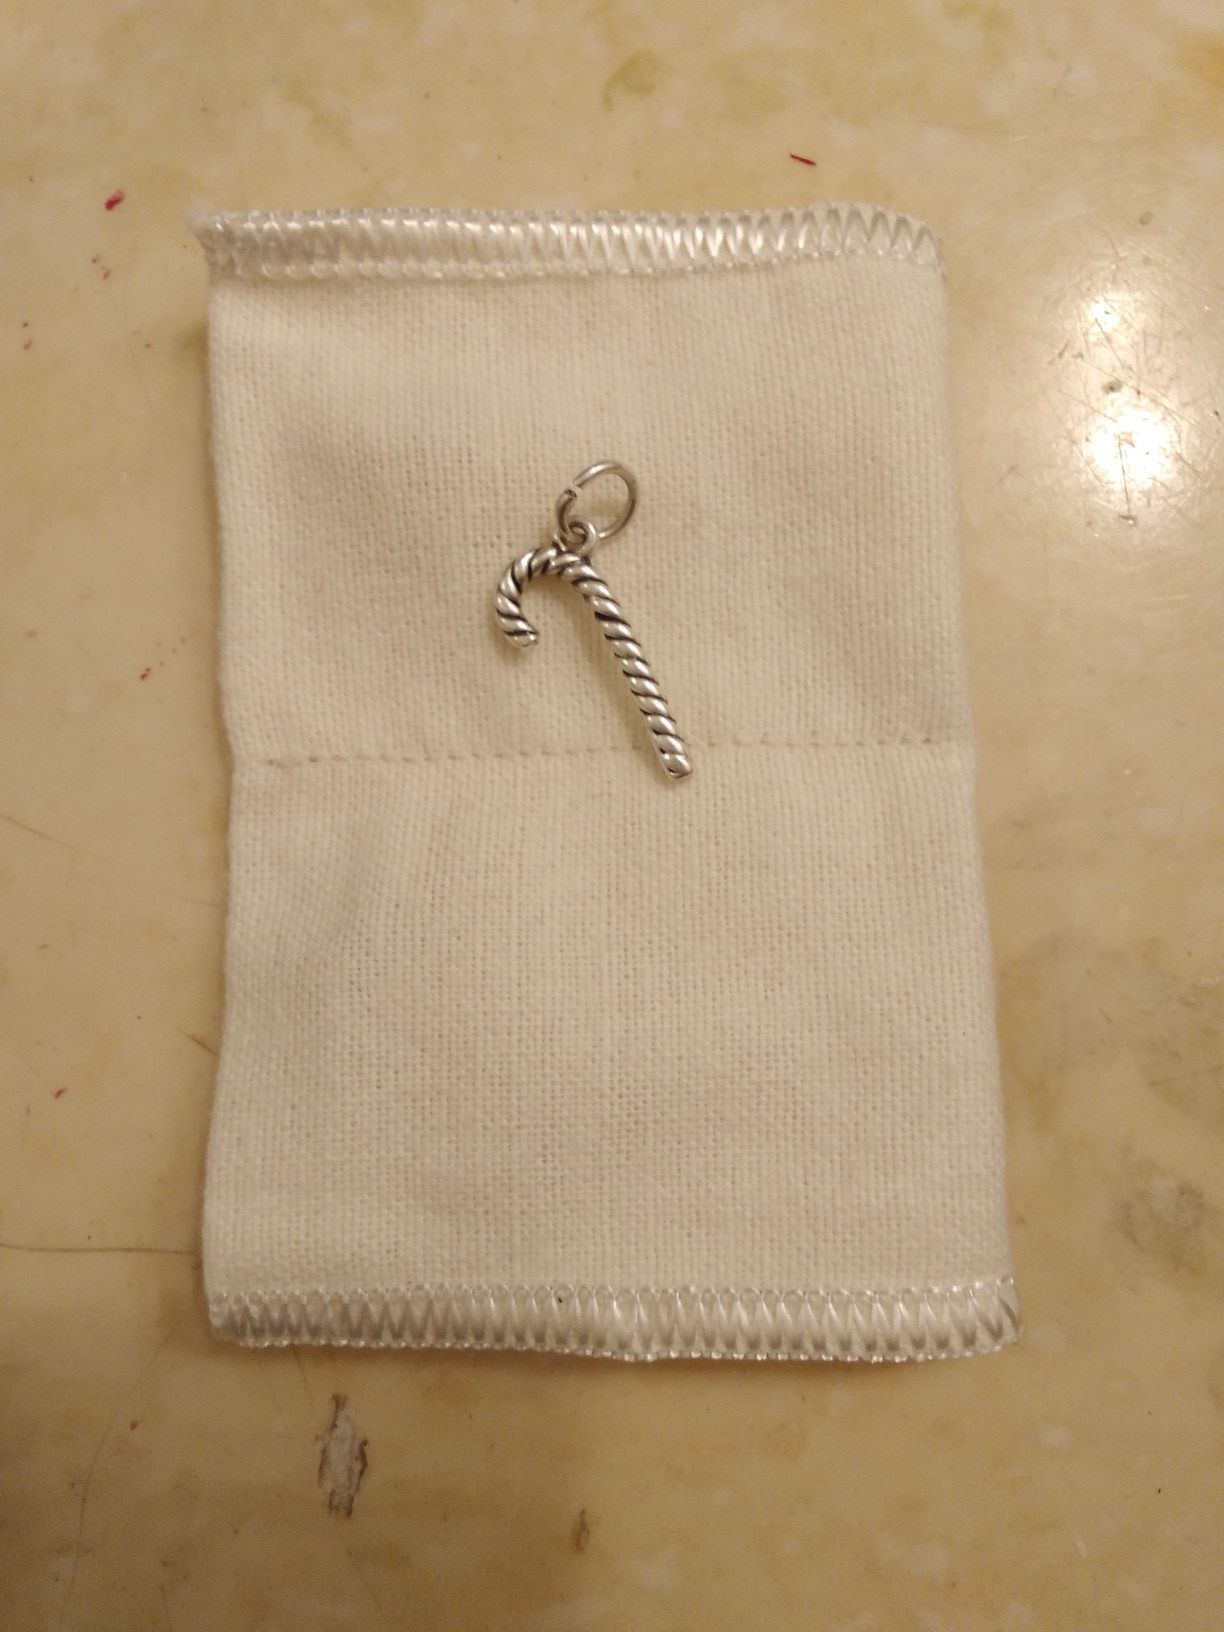 James Avery retired Candy cane charm